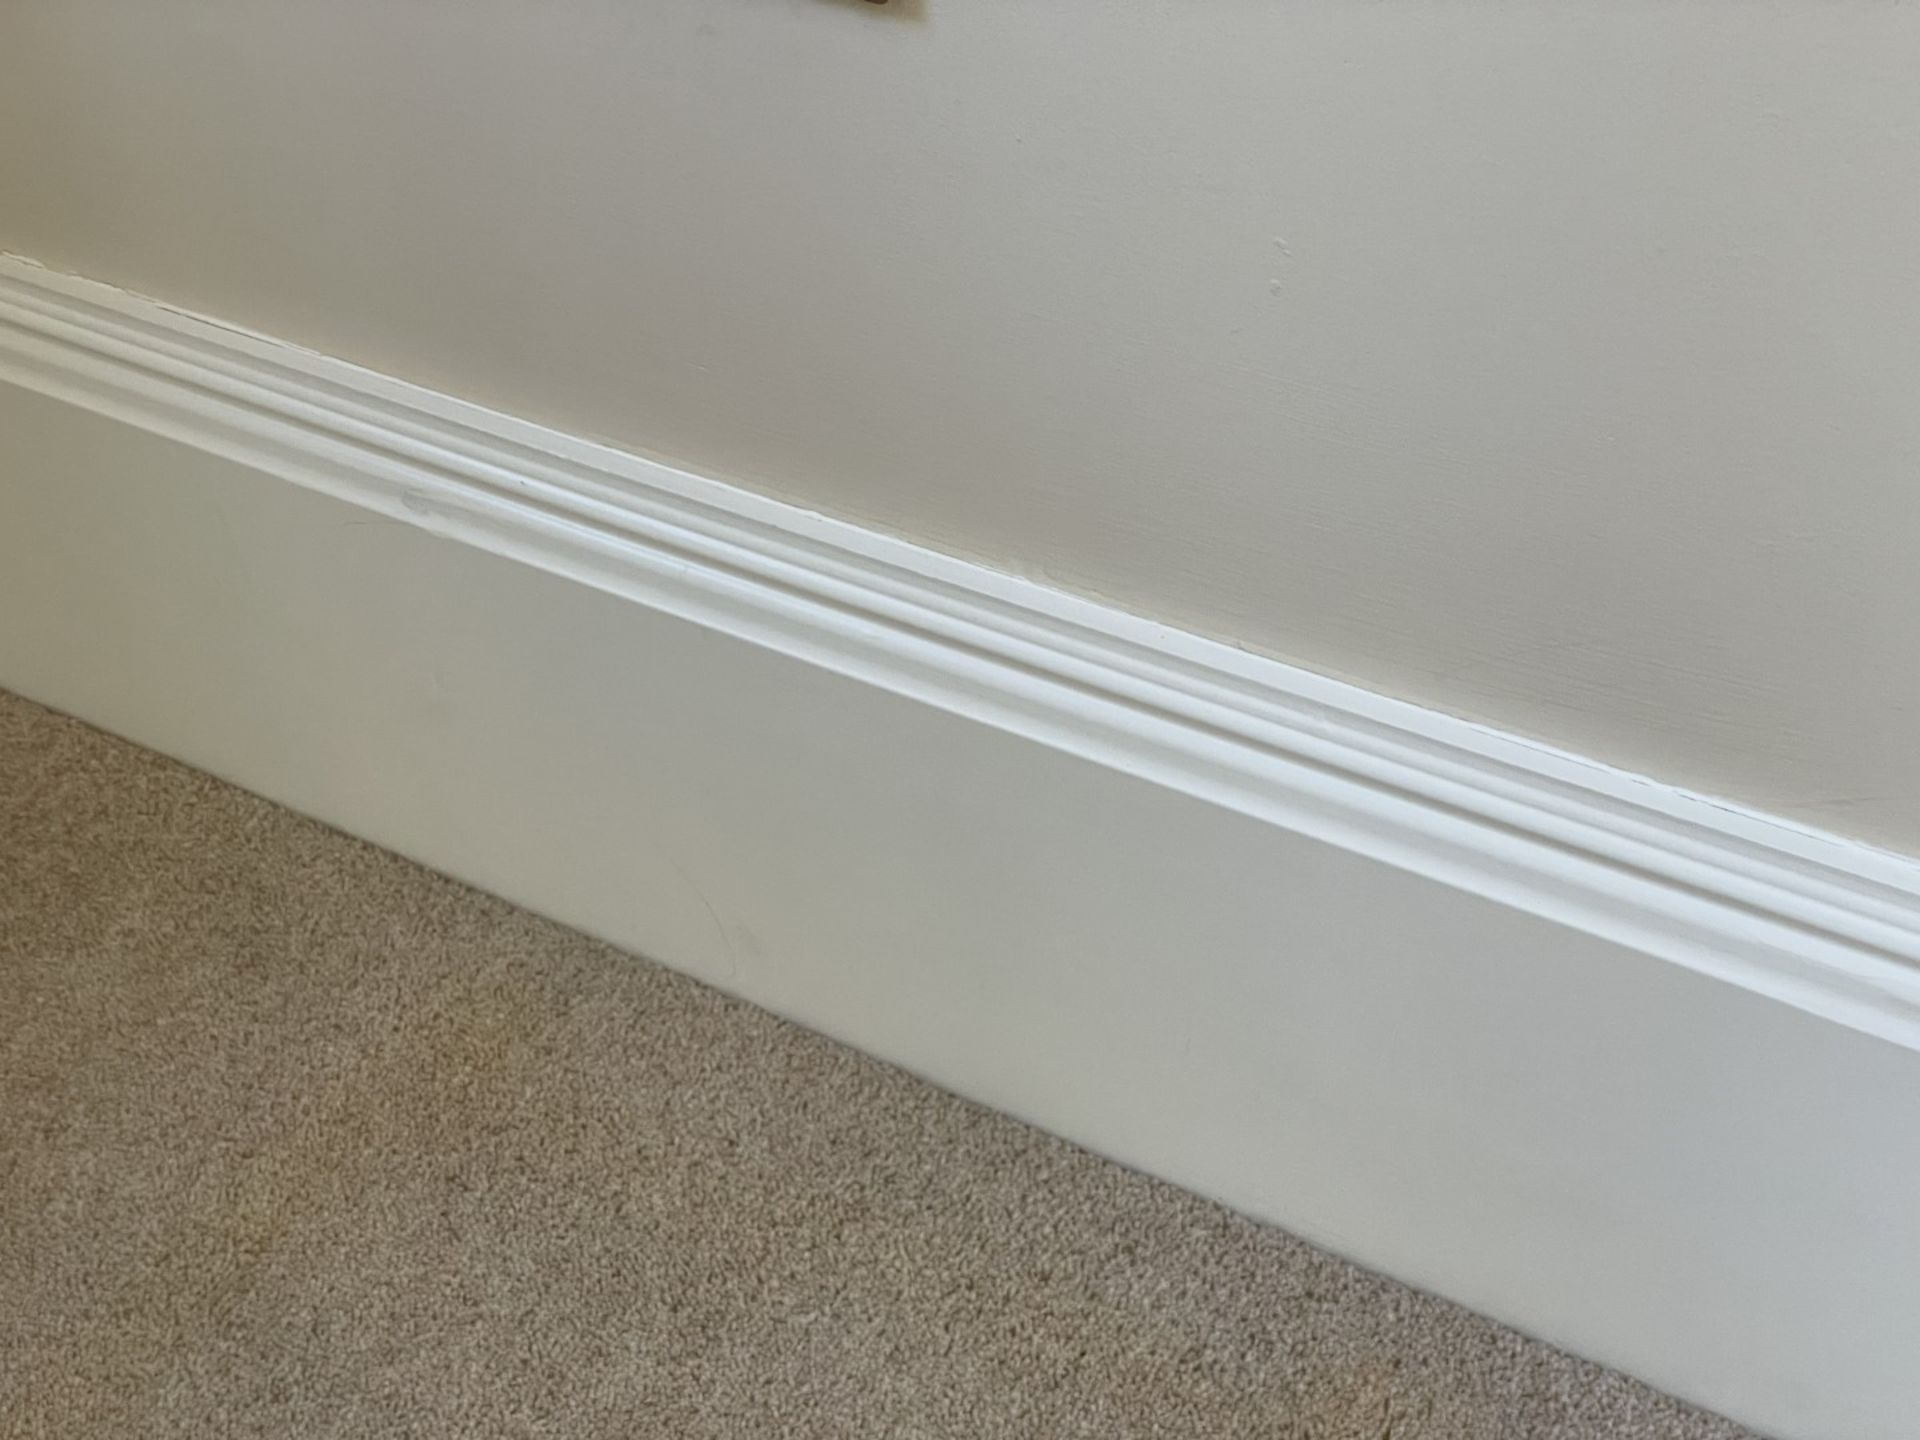 Approximately 20-Metres of Painted Timber Wooden Skirting Boards, In White - Ref: PAN219 - CL896 - - Image 3 of 8